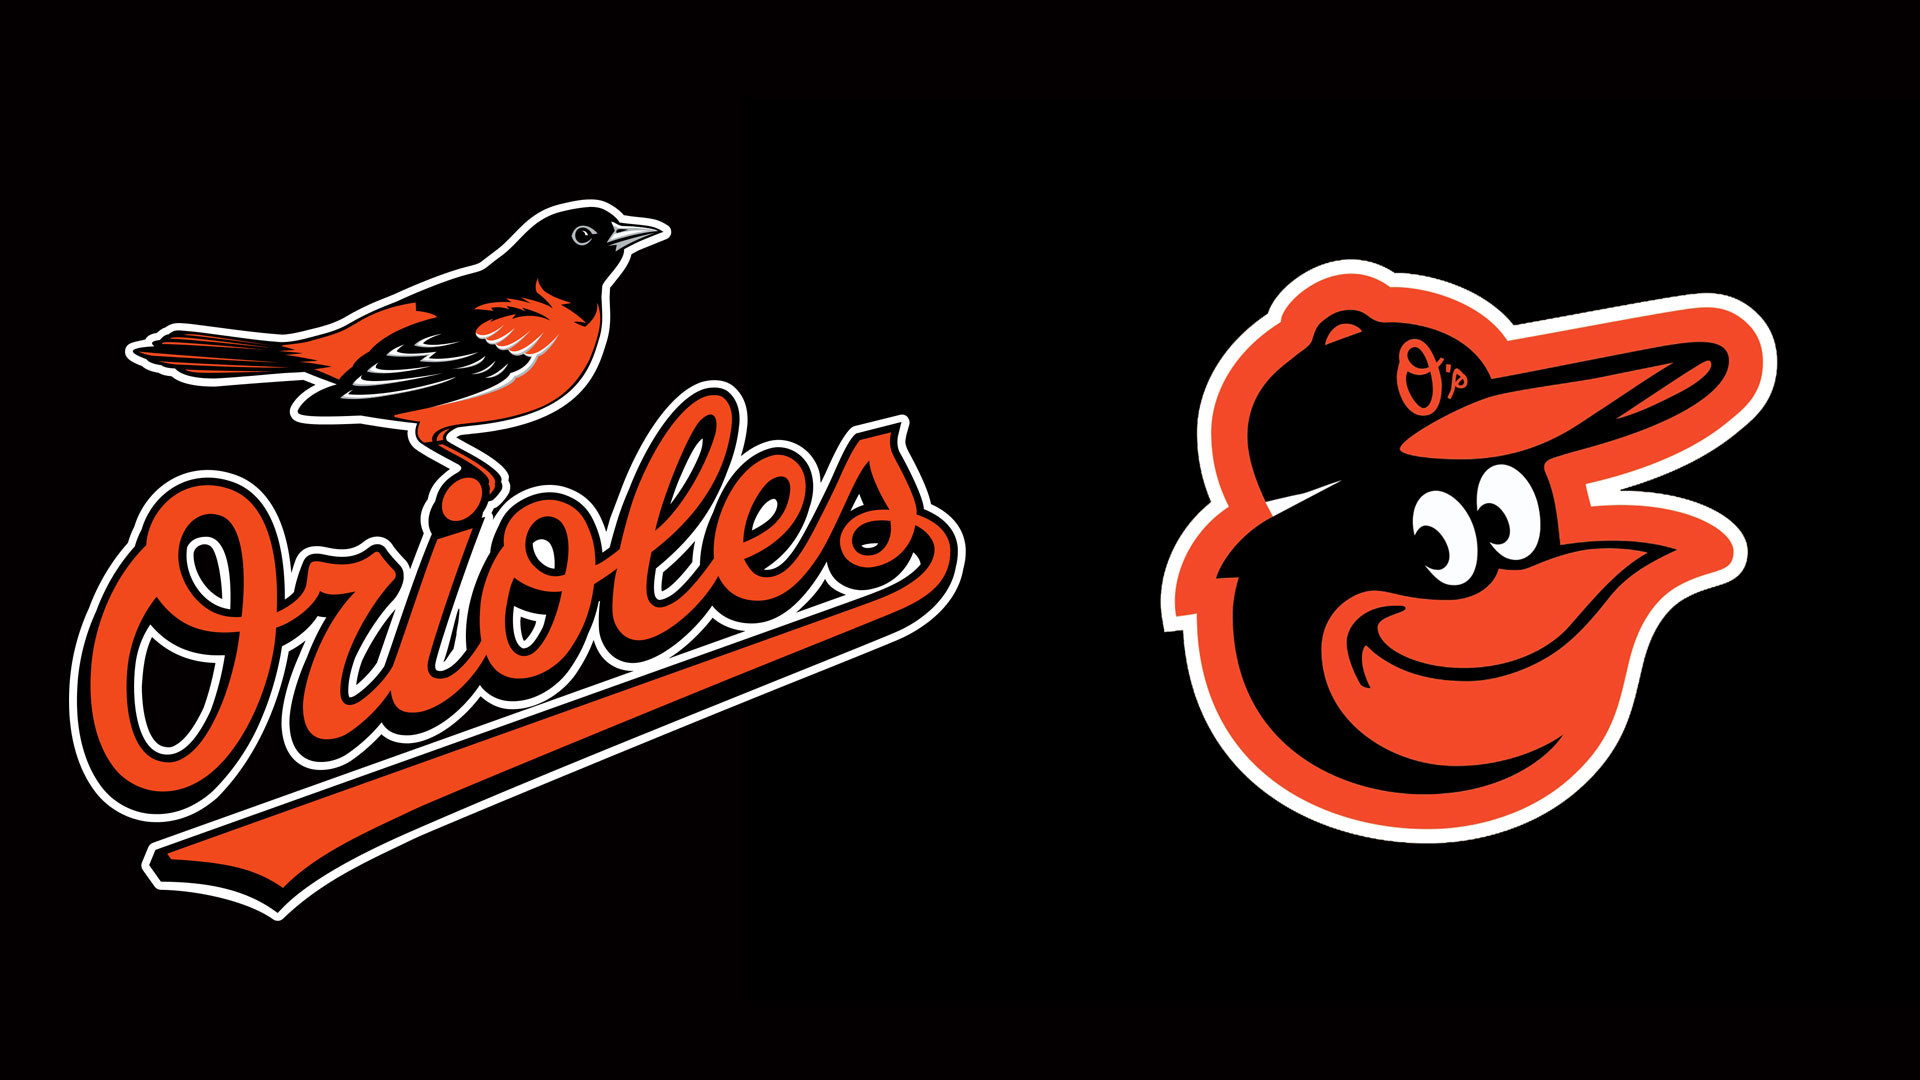 1920x1080 11 HD Baltimore Orioles Desktop Wallpapers For Free Download